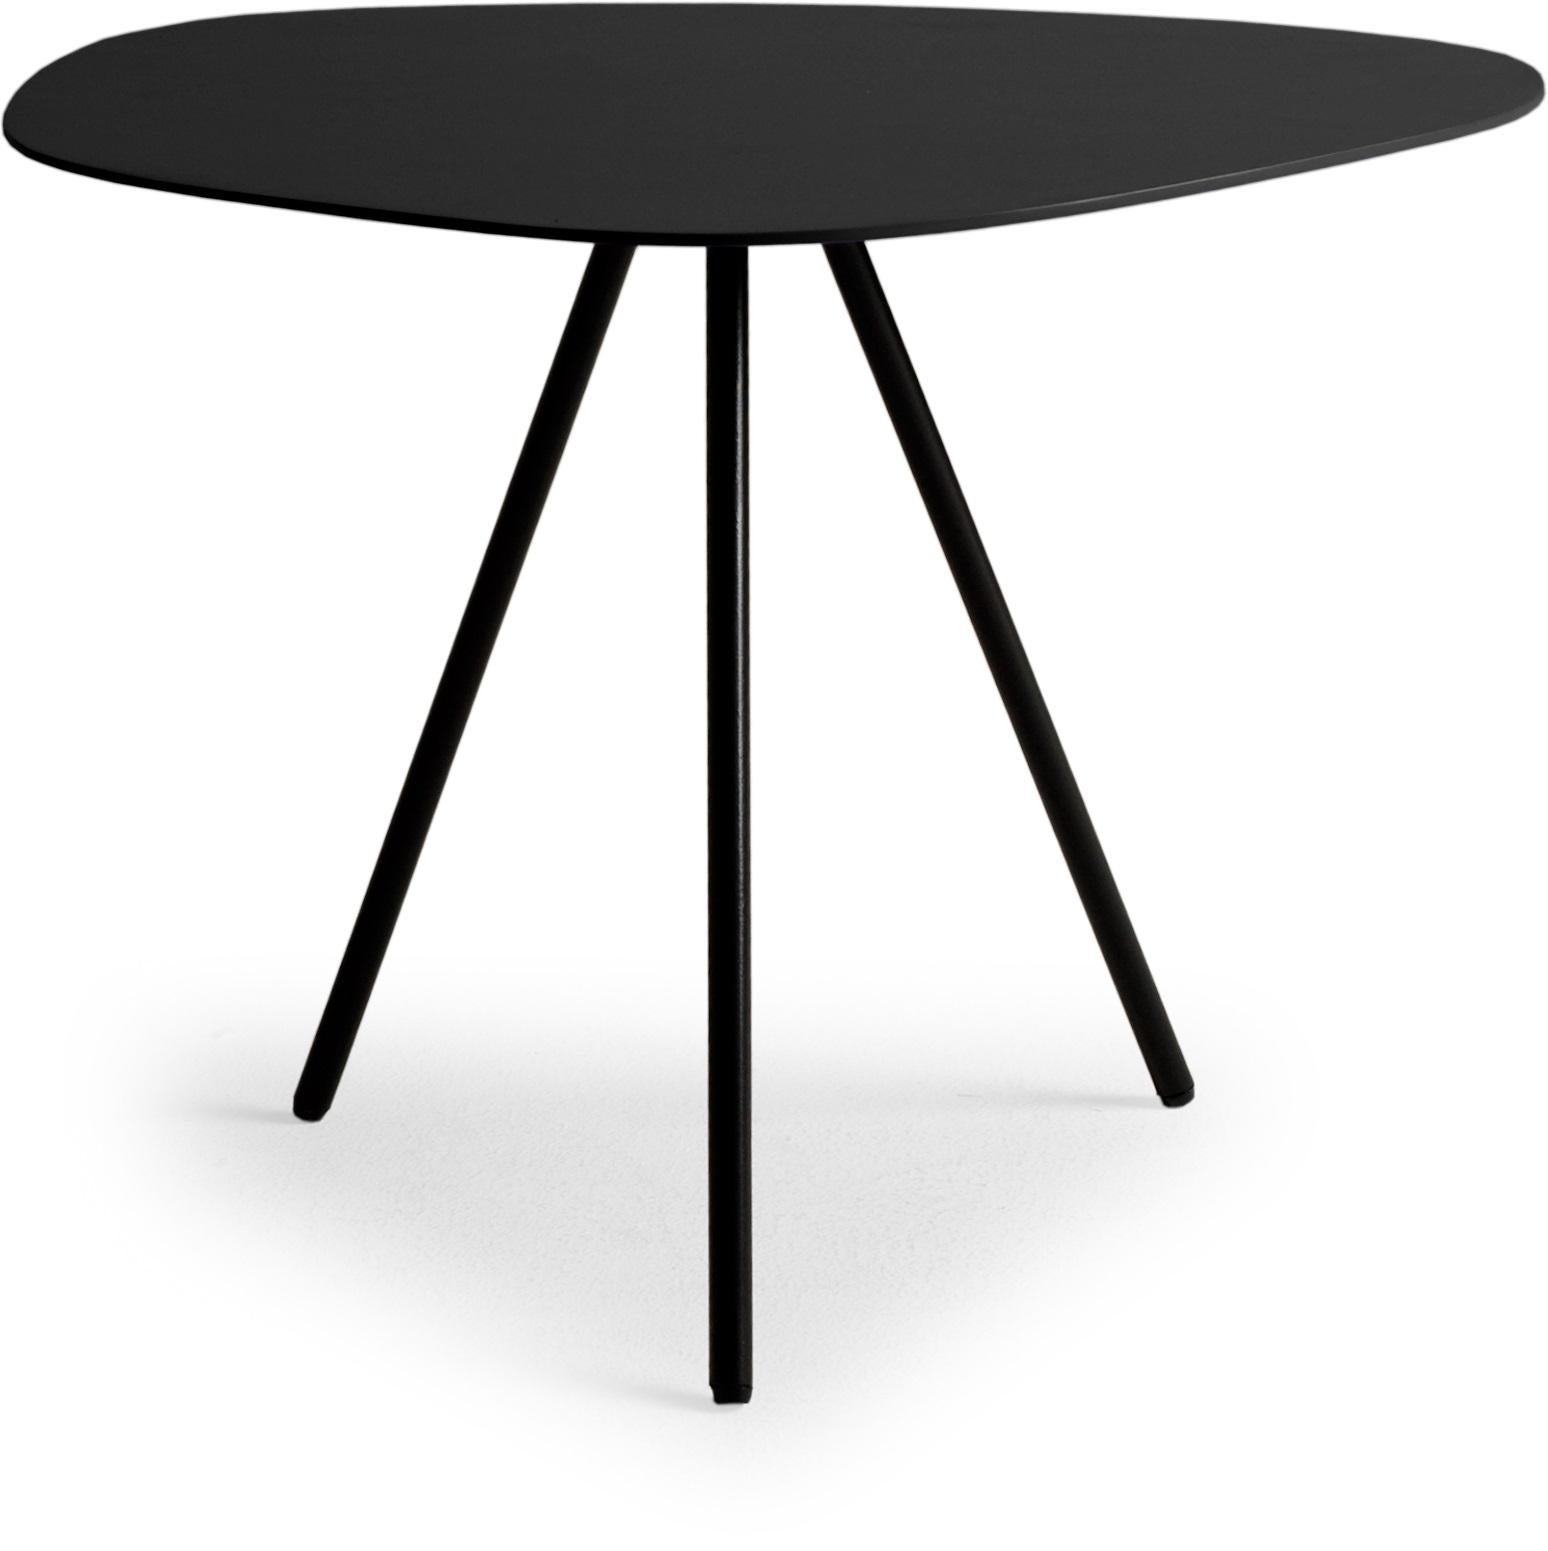 Black low indoorpebble end table by Kenneth Cobonpue.
Materials: Sapele, steel. 
Also available in other colors and for outdoors.
Dimensions: 36 cm x 47 cm x H 35 cm 

Pebble playfully echoes shapes found in nature like stepping-stones in a